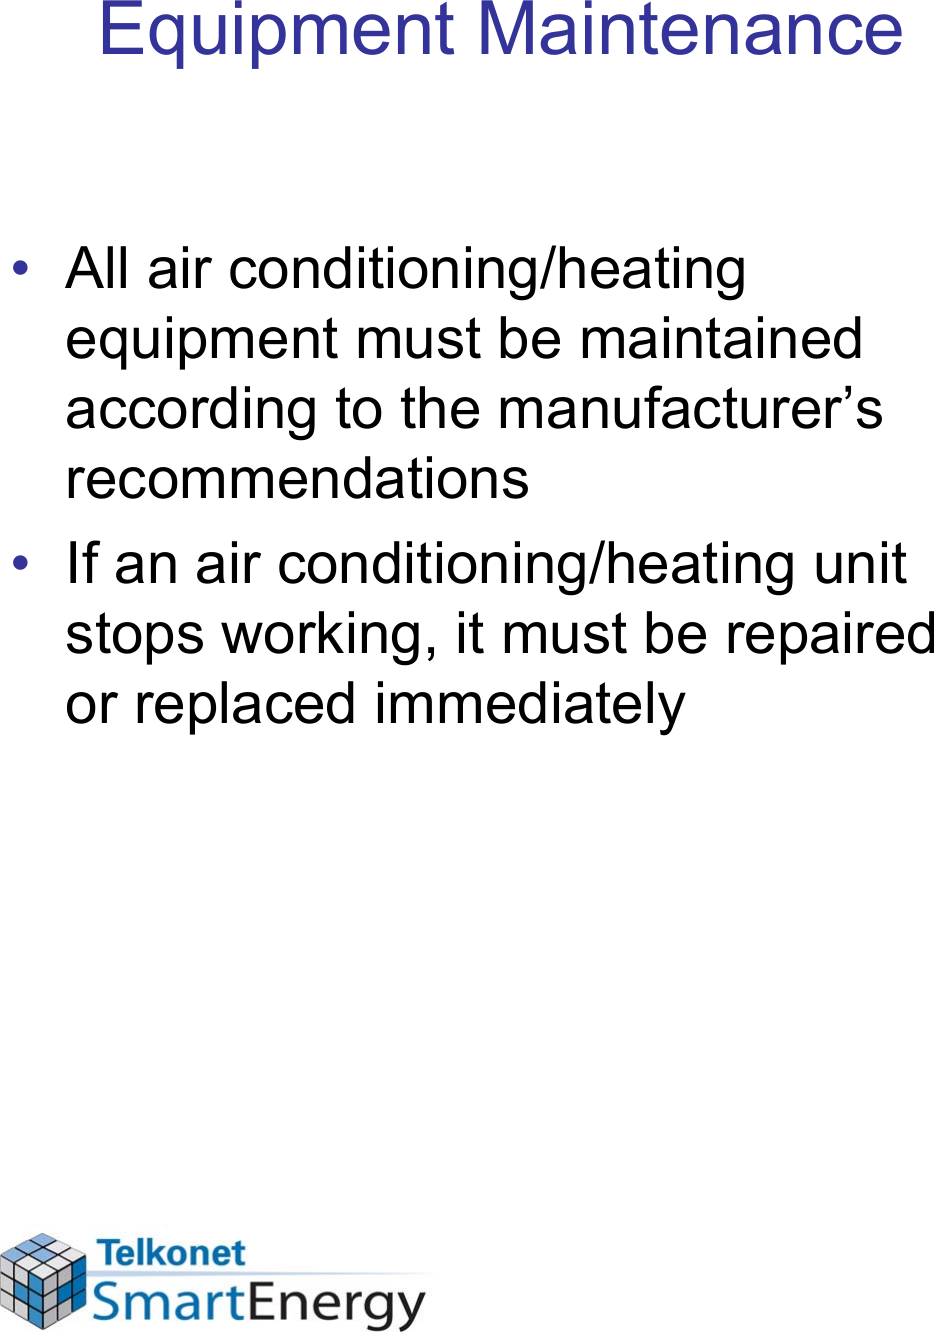 Equipment Maintenance• All air conditioning/heating equipment must be maintained according to the manufacturer’s recommendations• If an air conditioning/heating unit stops working, it must be repaired or replaced immediately